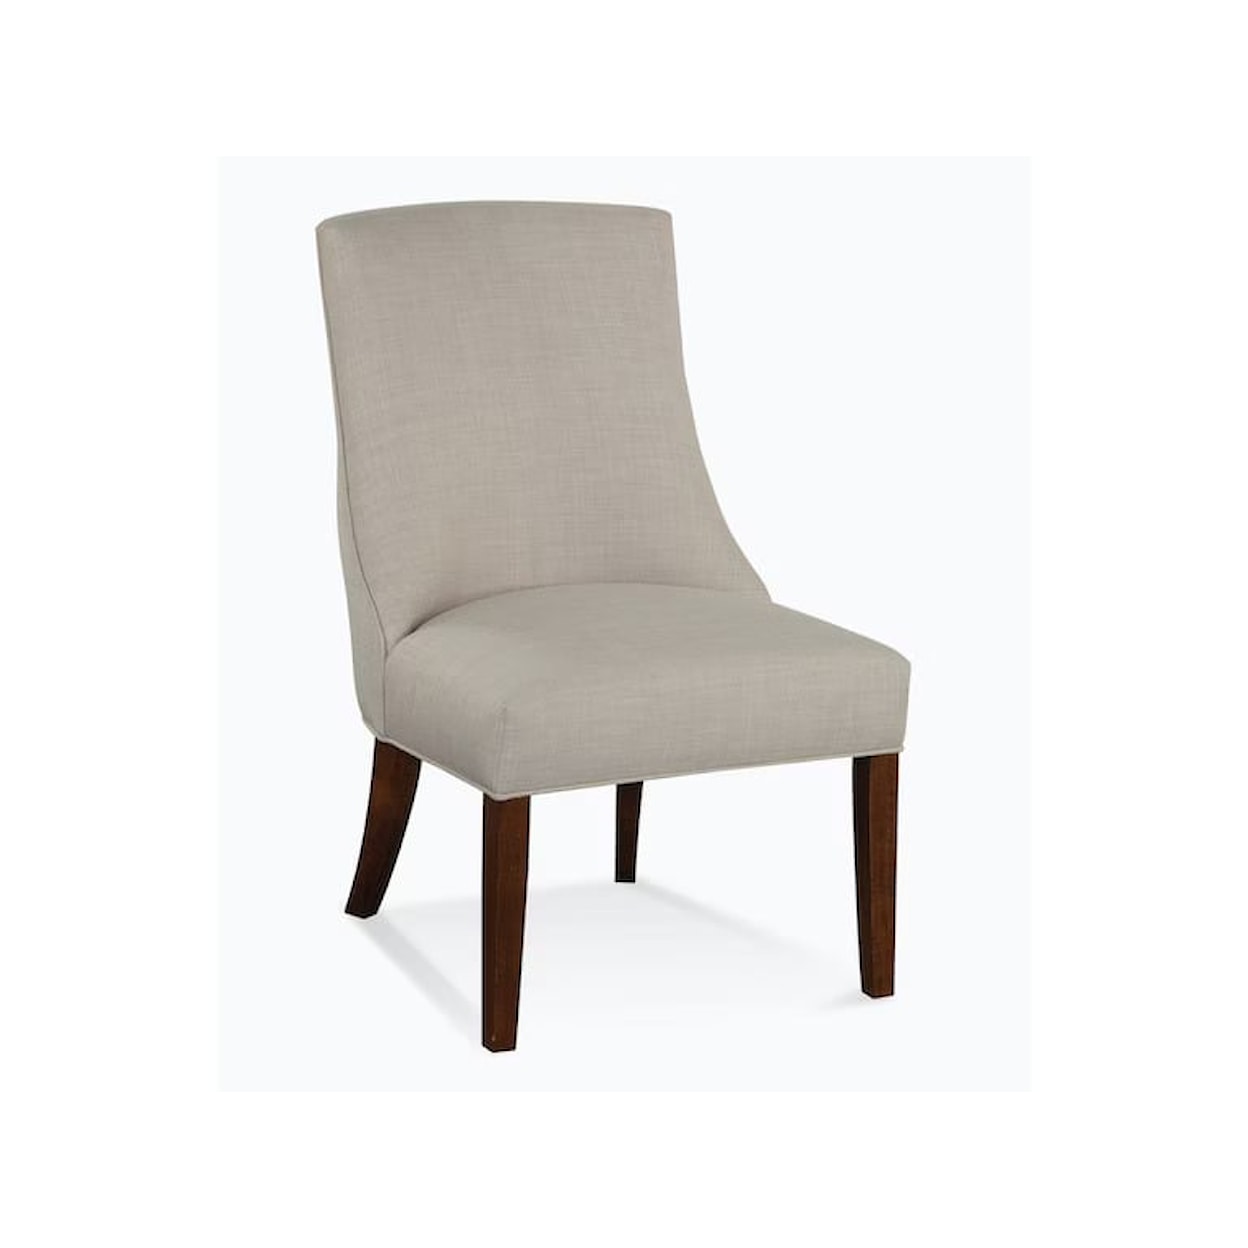 Braxton Culler Tuxedo Upholstered Dining Chair